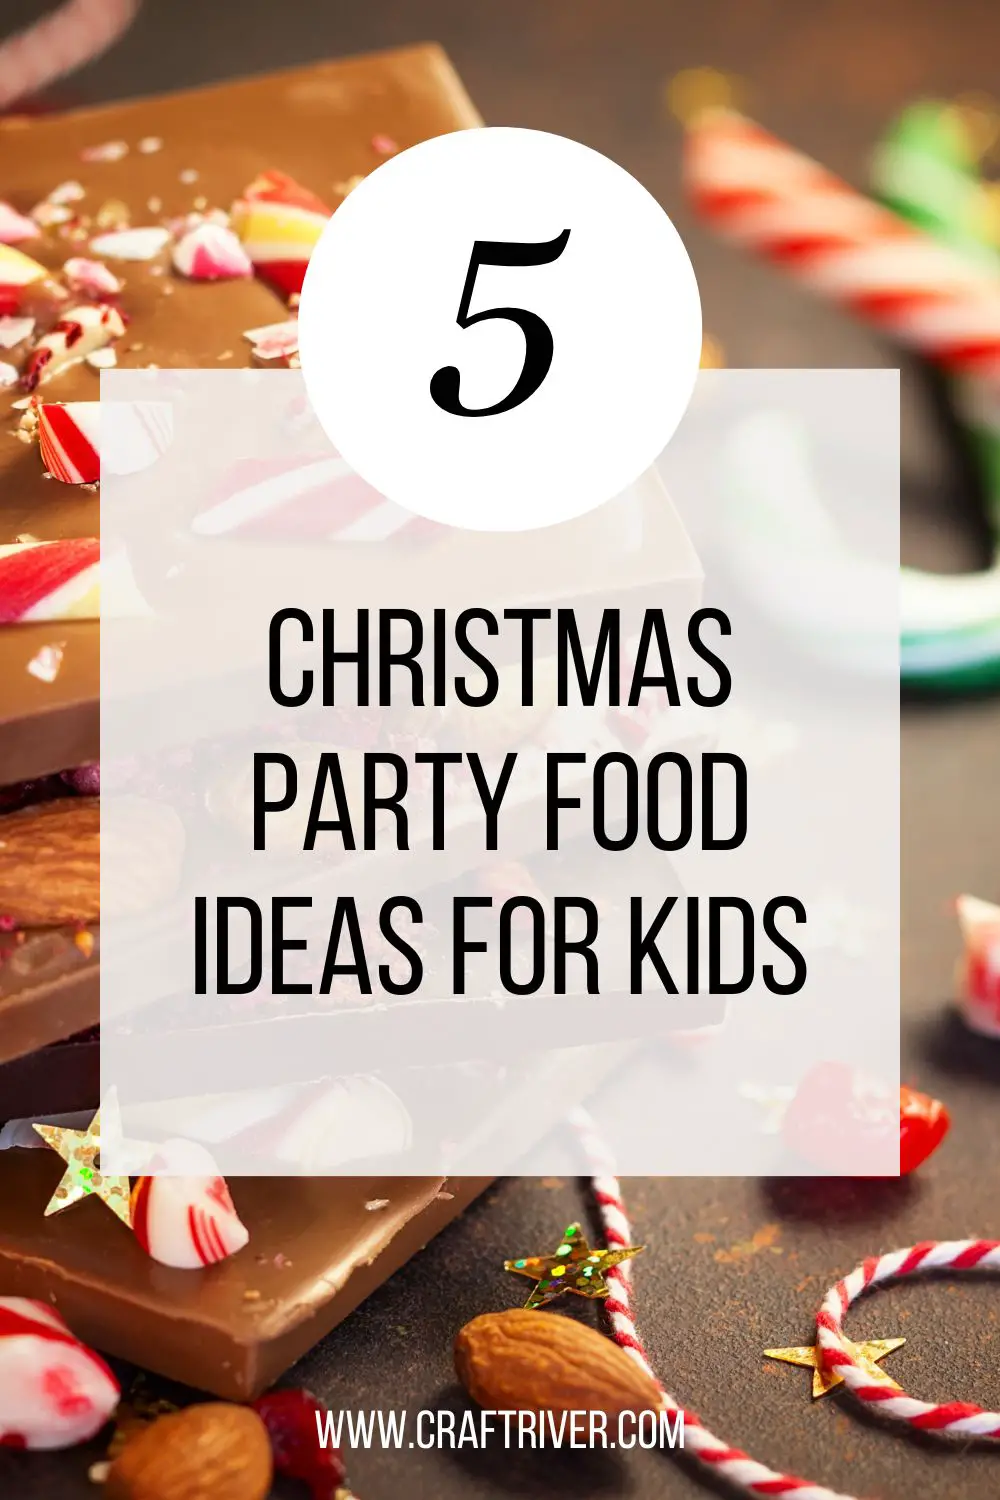 Christmas Party Food Ideas for Kids